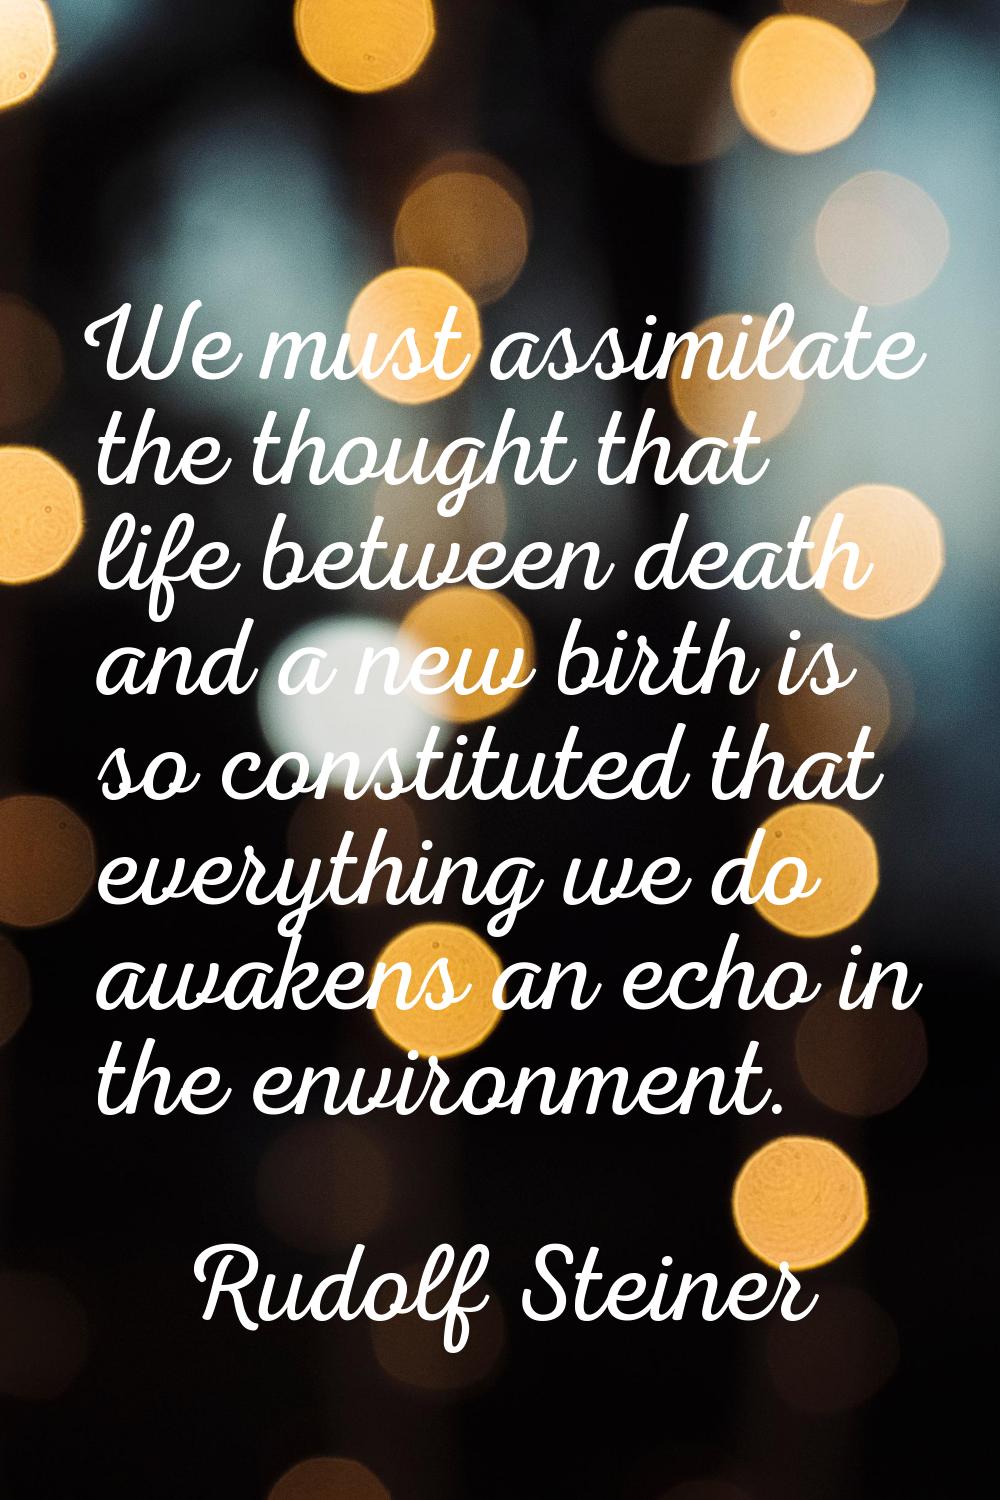 We must assimilate the thought that life between death and a new birth is so constituted that every